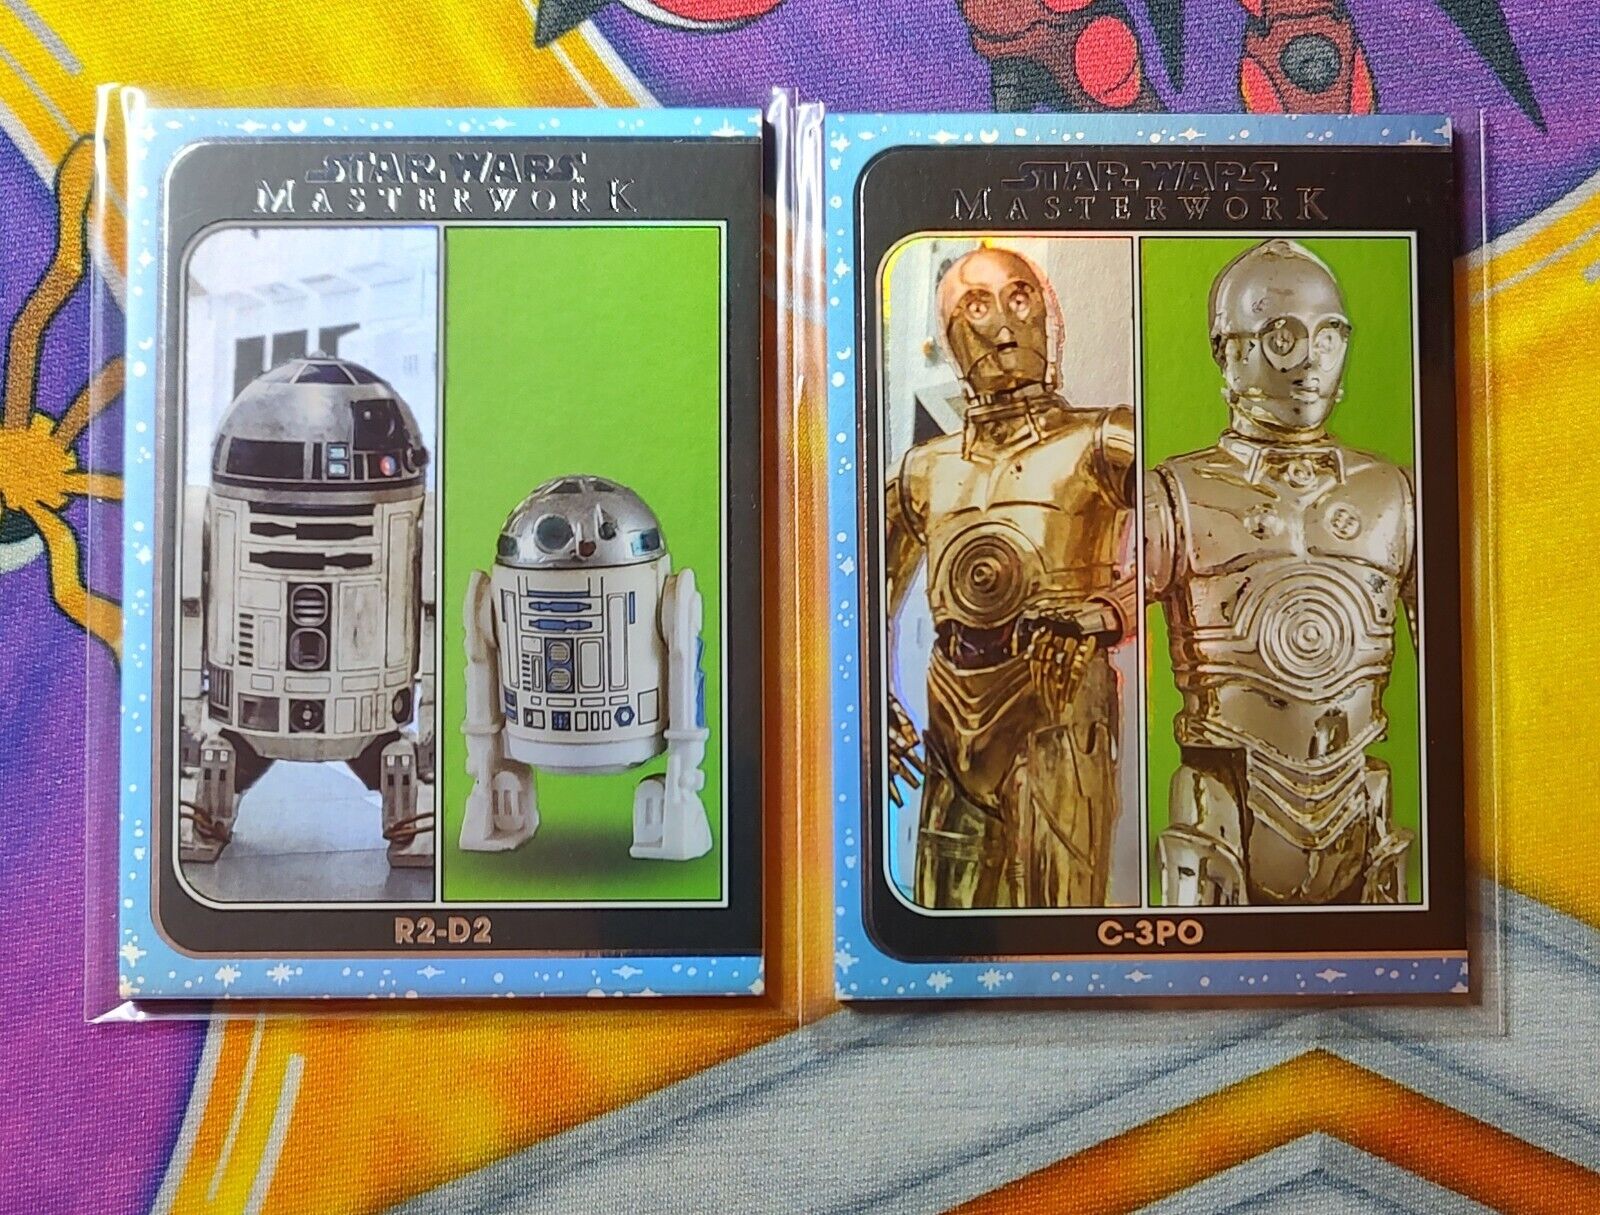 2021 Topps Star Wars Masterwork /299 R2-D2 / C-3PO Out Of The Box Insert Cards